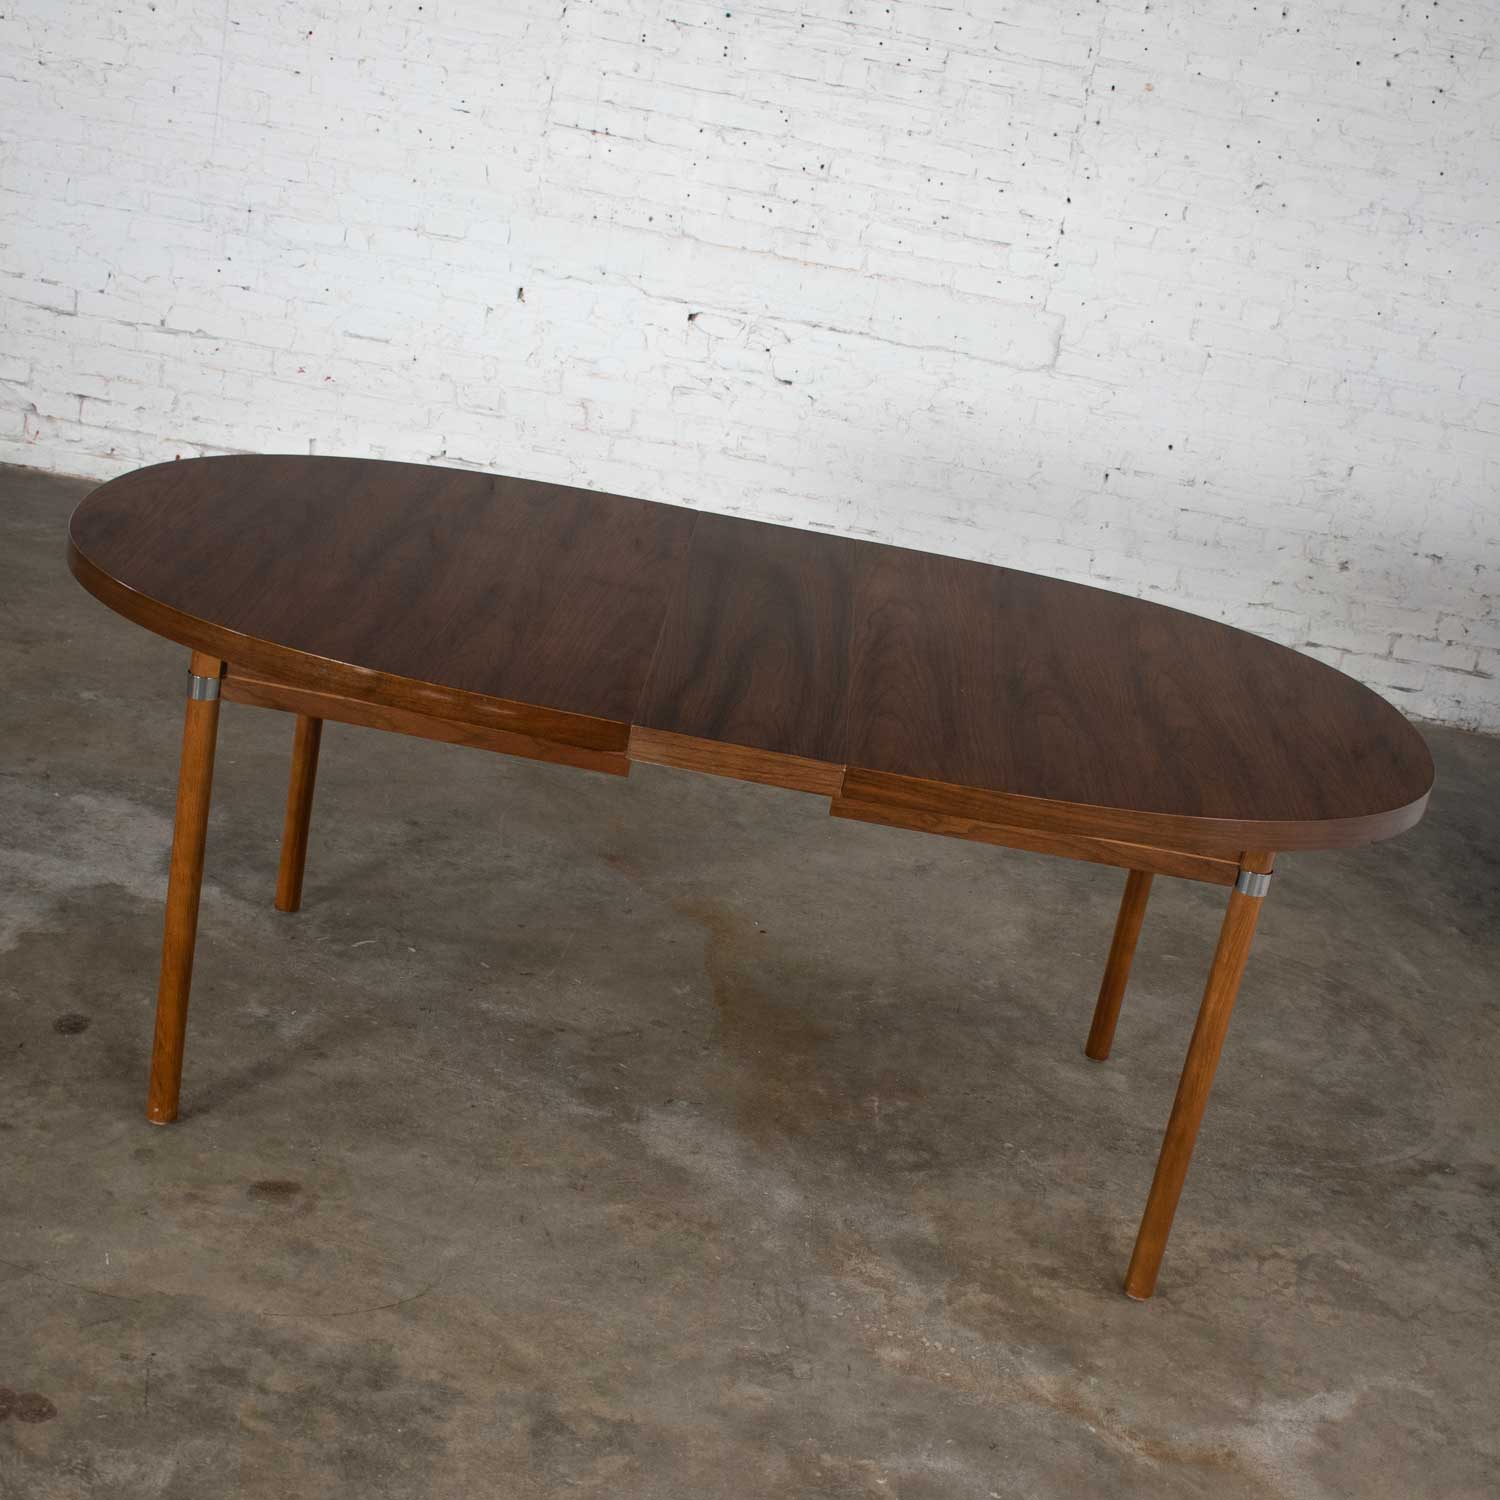 MCM Oval Walnut Toned Expanding Dining Table with Chrome Accents and Wood Grain Laminate Top